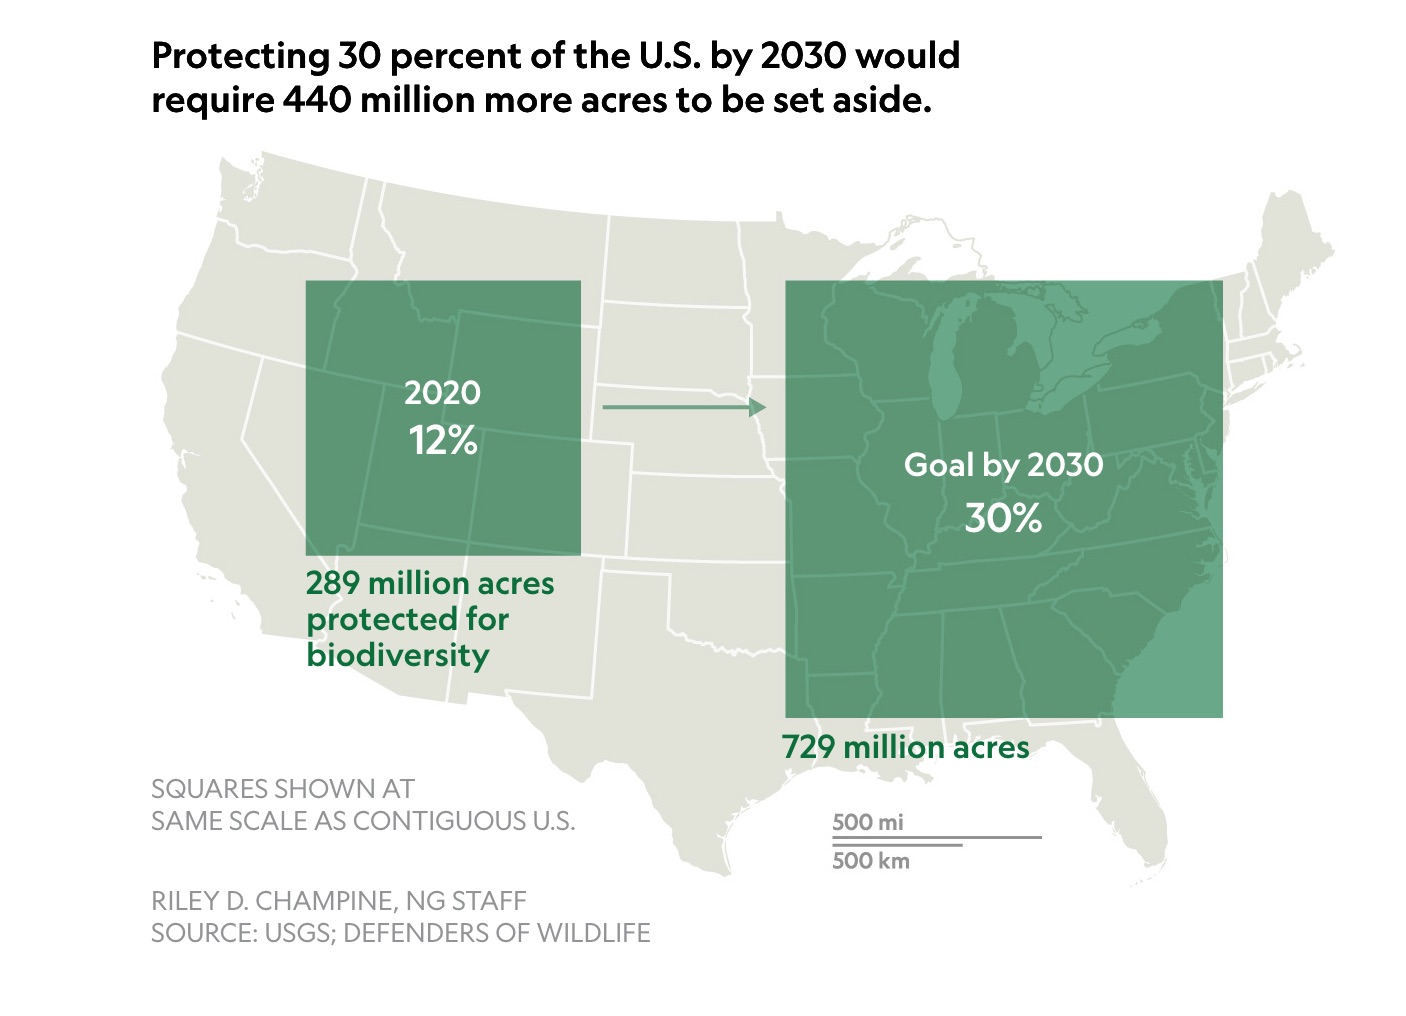 The U.S. commits to tripling its protected lands. Here’s how it could be done.